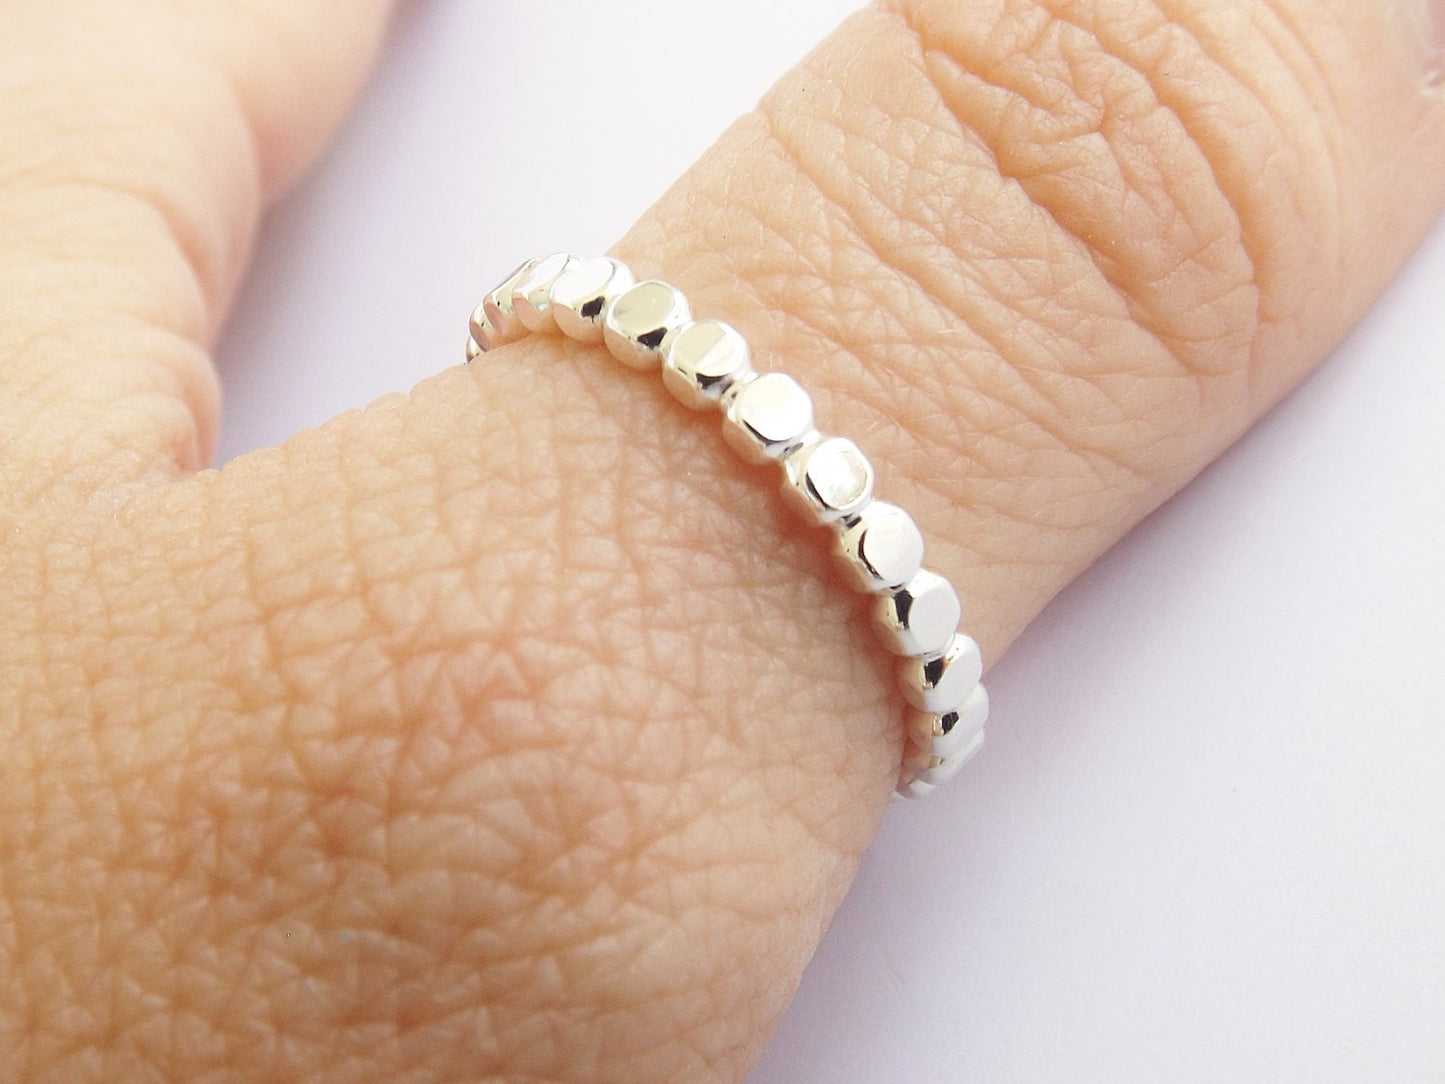 Thick Modern Design Thumb Ring,Sterling Drop Bead Thumb Ring,Stacking Ring,Modern Boho Rng,Drop Ring,Super Thick Beaded Ring,Statement